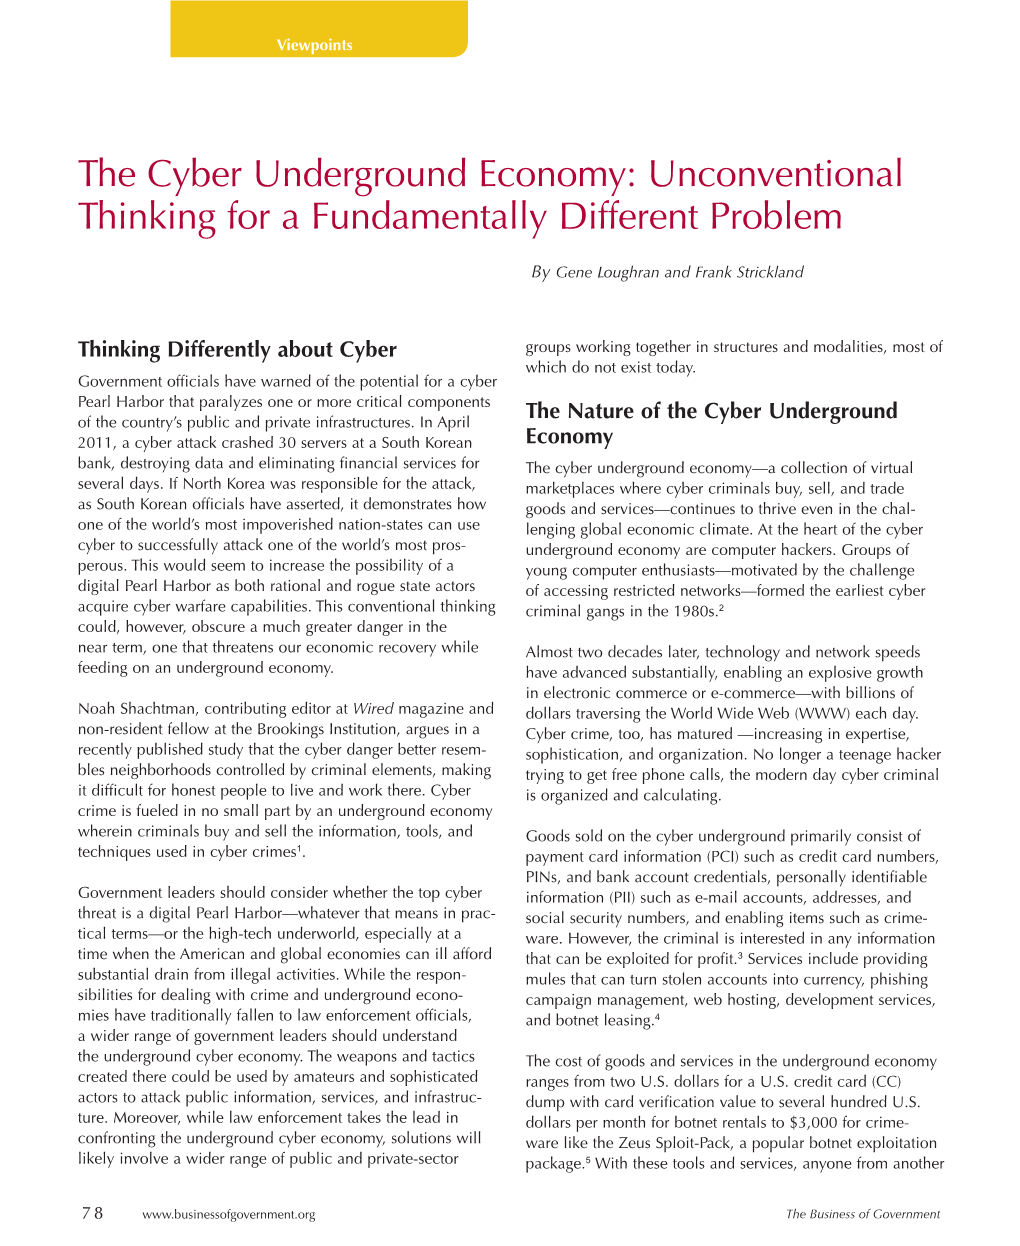 The Cyber Underground Economy: Unconventional Thinking for a Fundamentally Different Problem